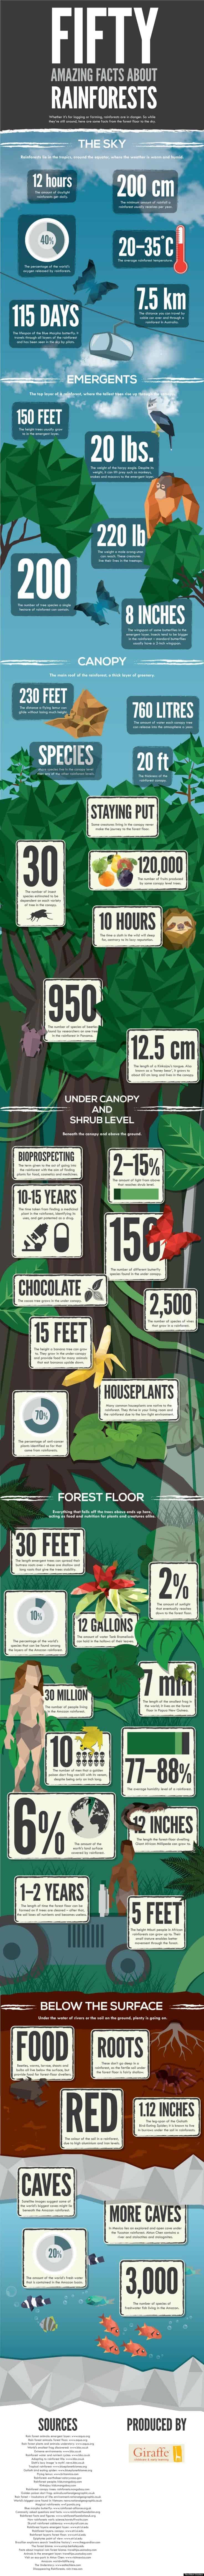 Facts about rainforests and why they are disappearing